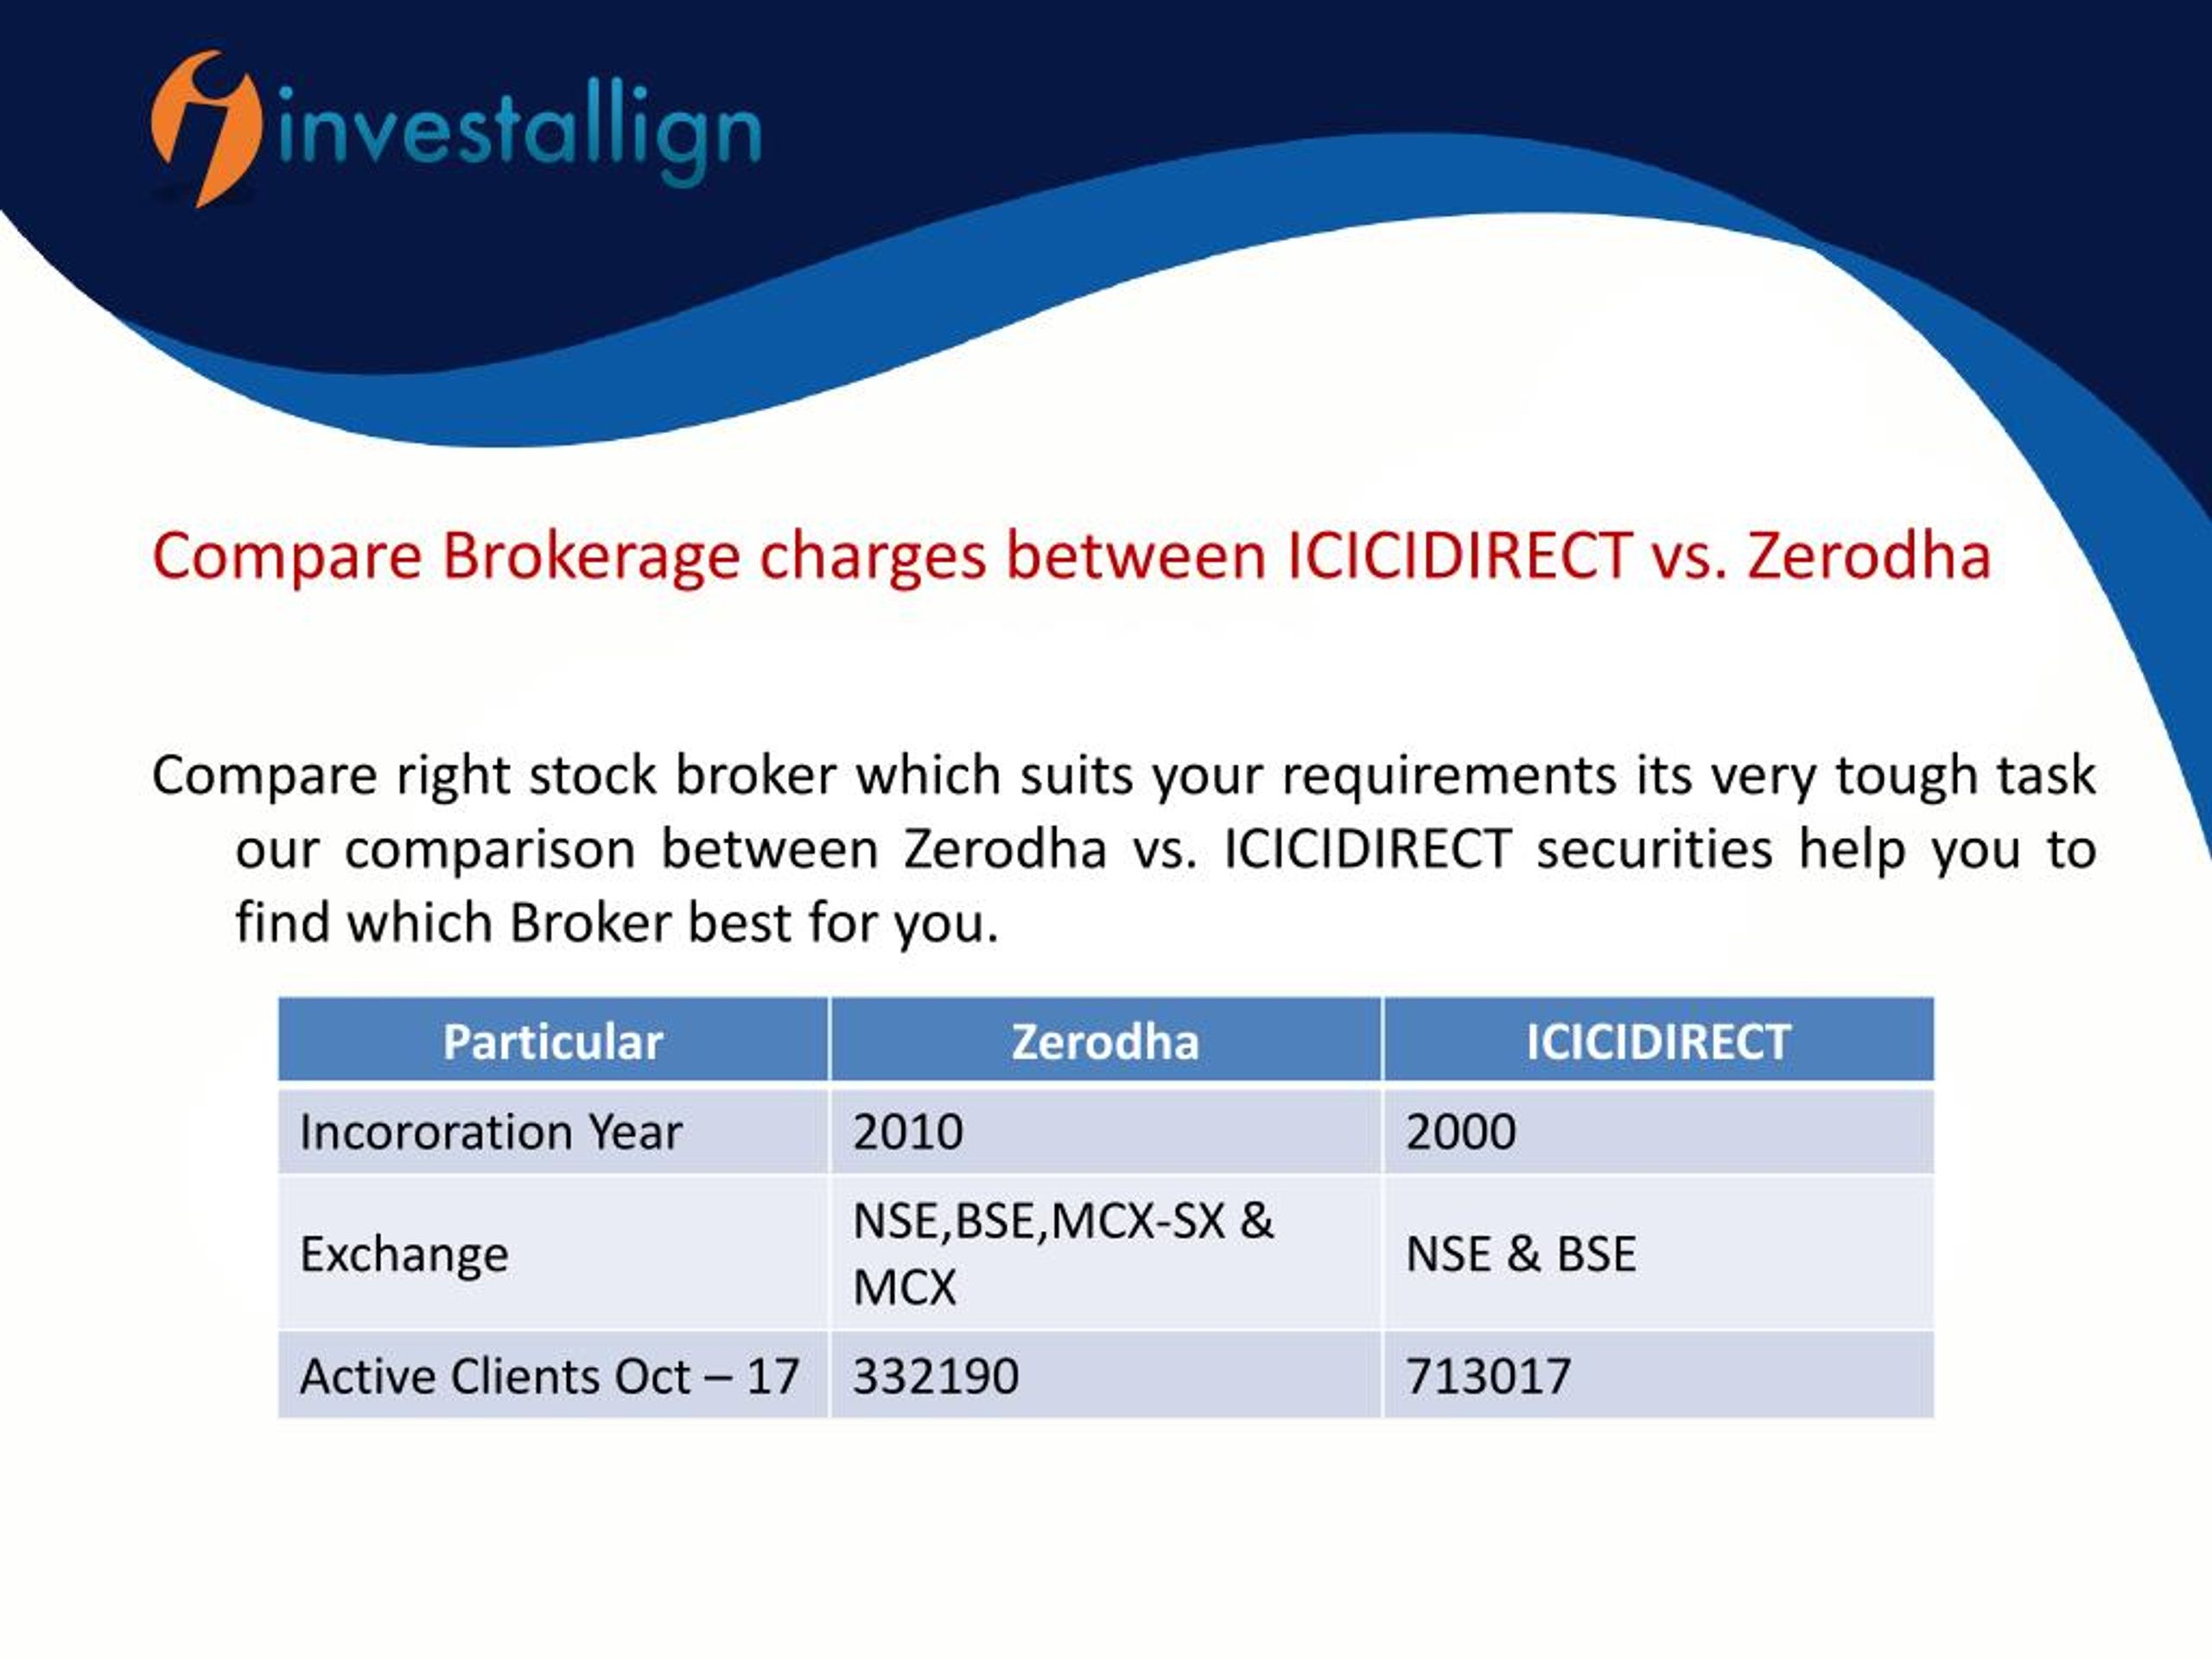 Ppt Compare Zerodha Vs Icicidirect Brokerage Charges Powerpoint Presentation Id7821942 0026